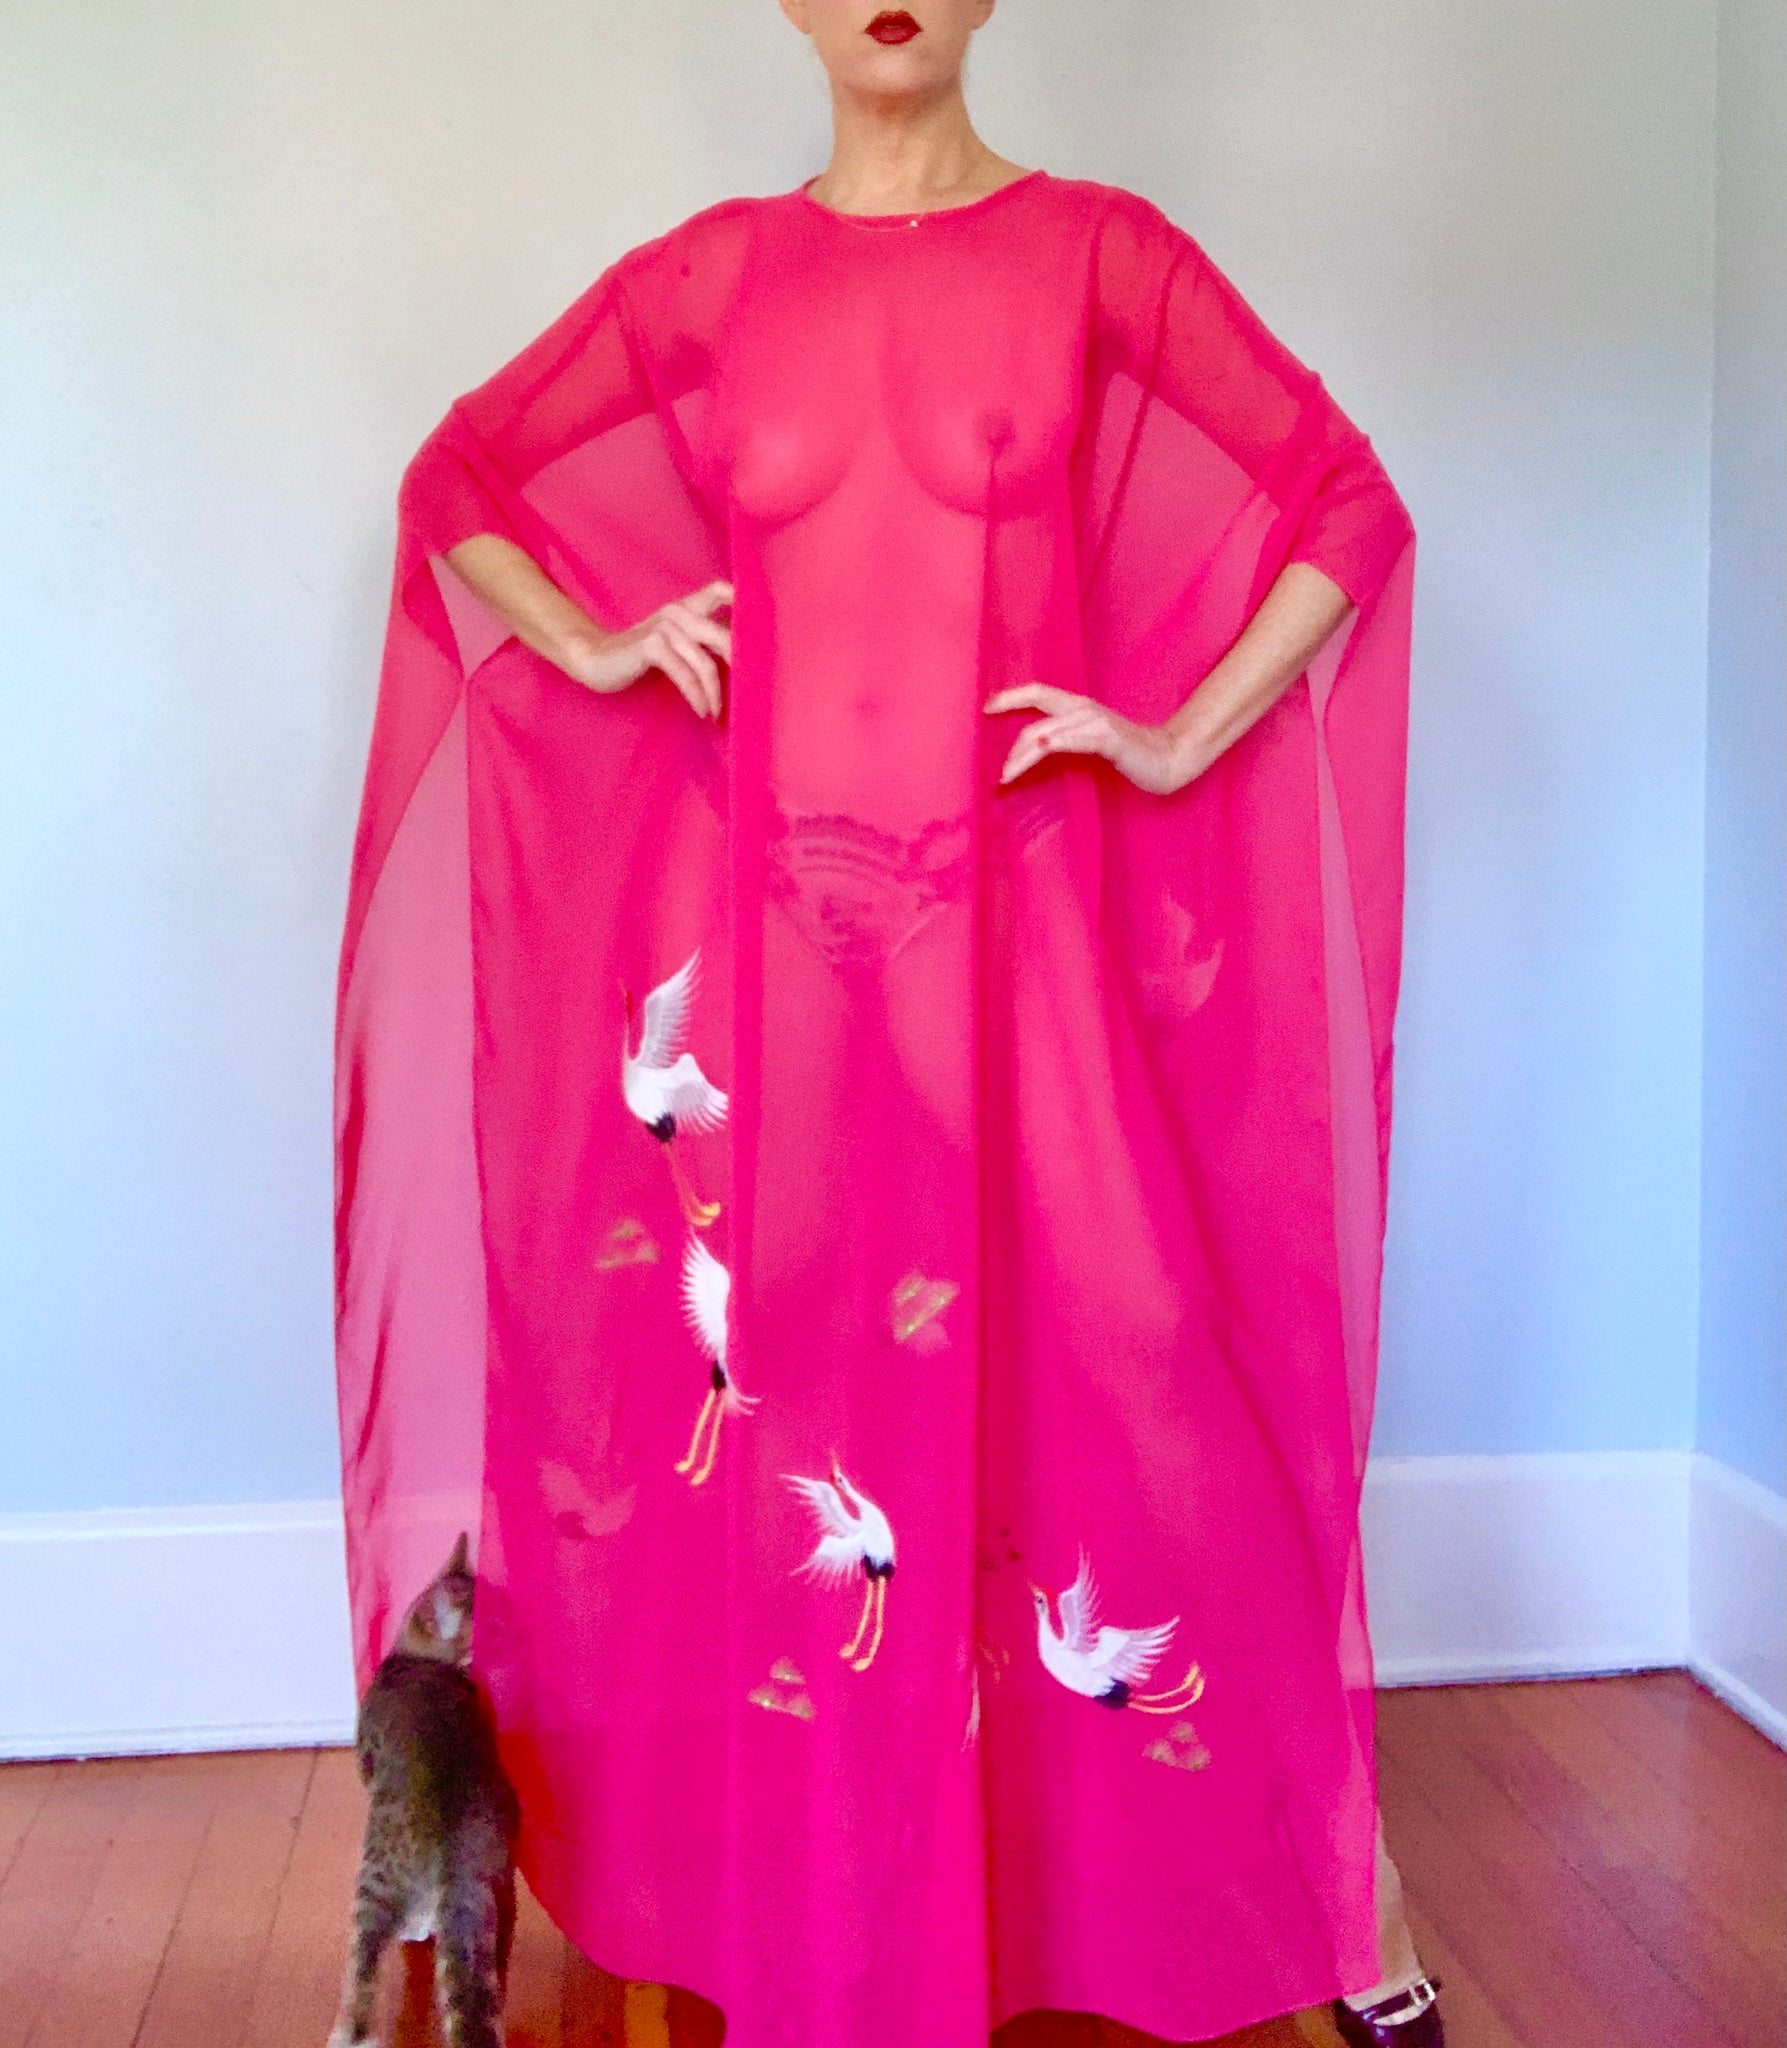 1970s Sheer Chiffon Caftan with Embroidered Cranes & Matching Underdress